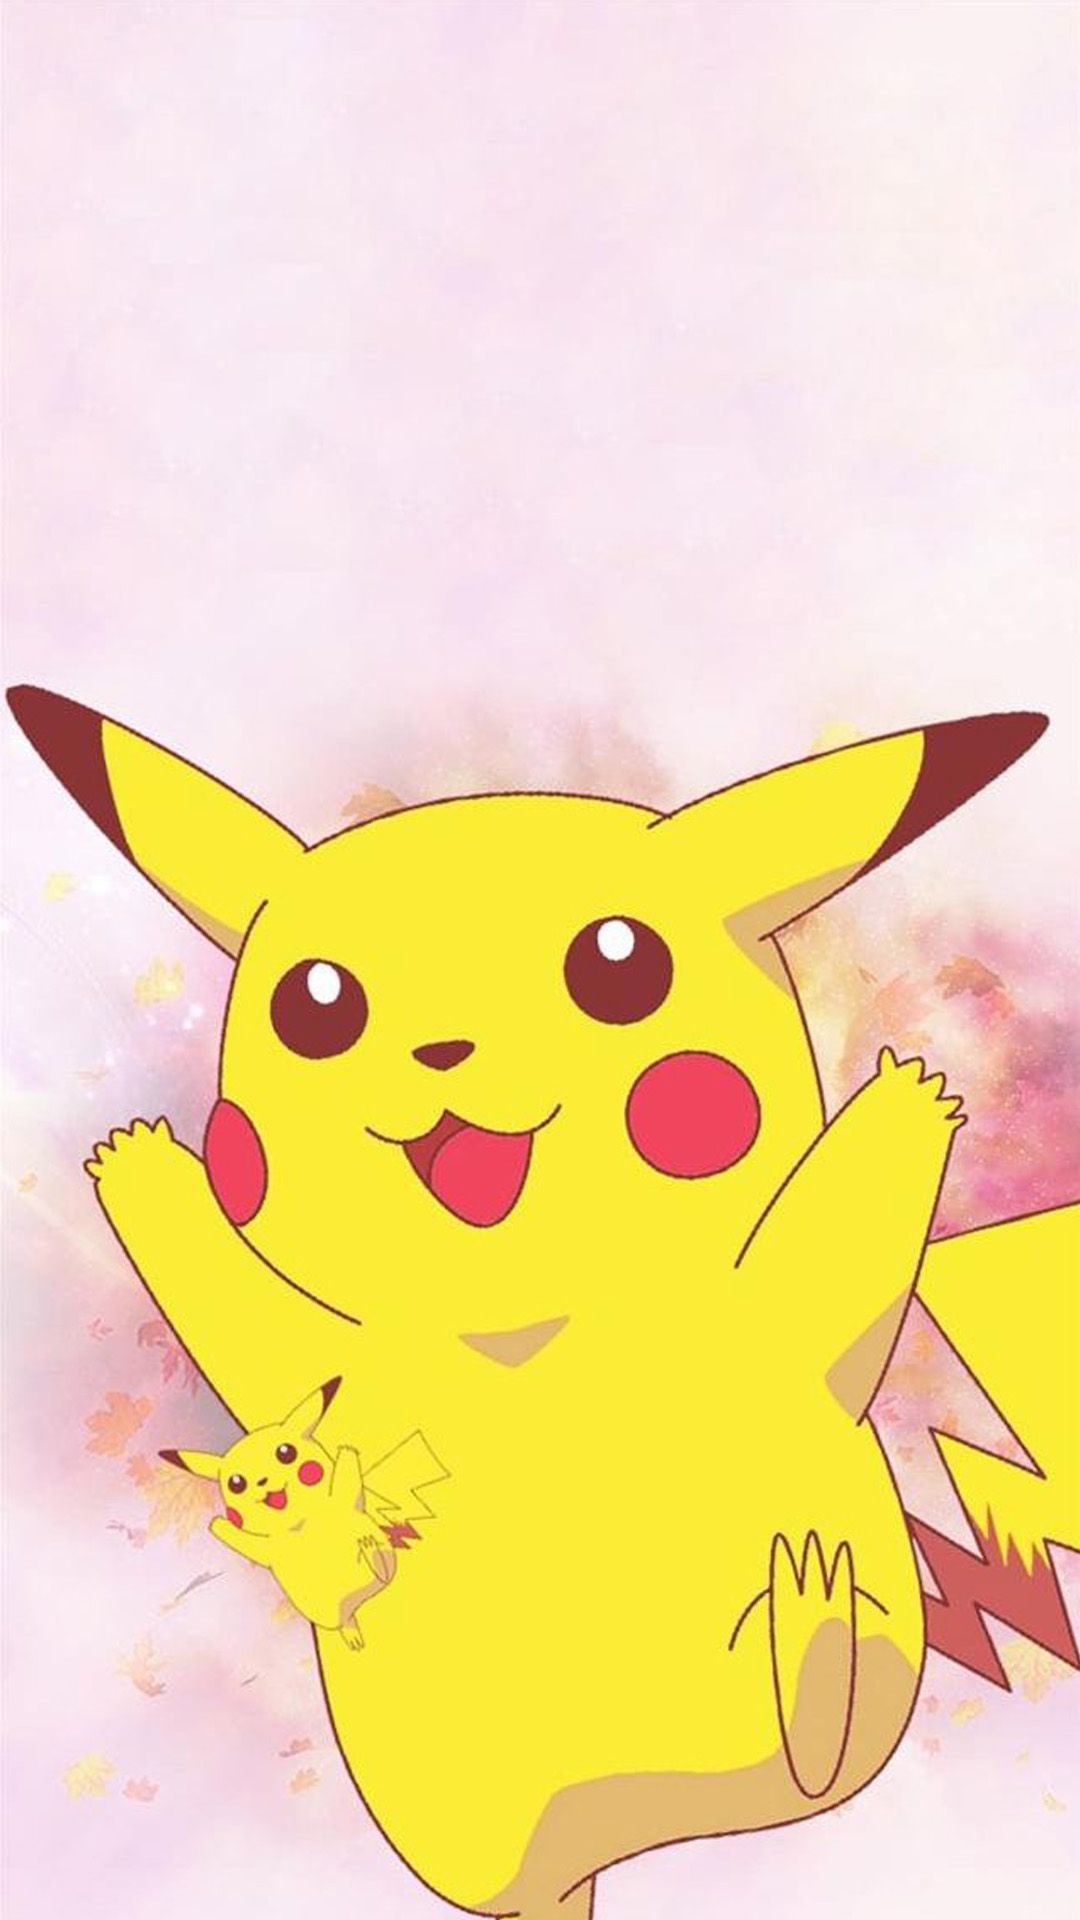 Pikachu Android wallpaper – Android HD wallpapers